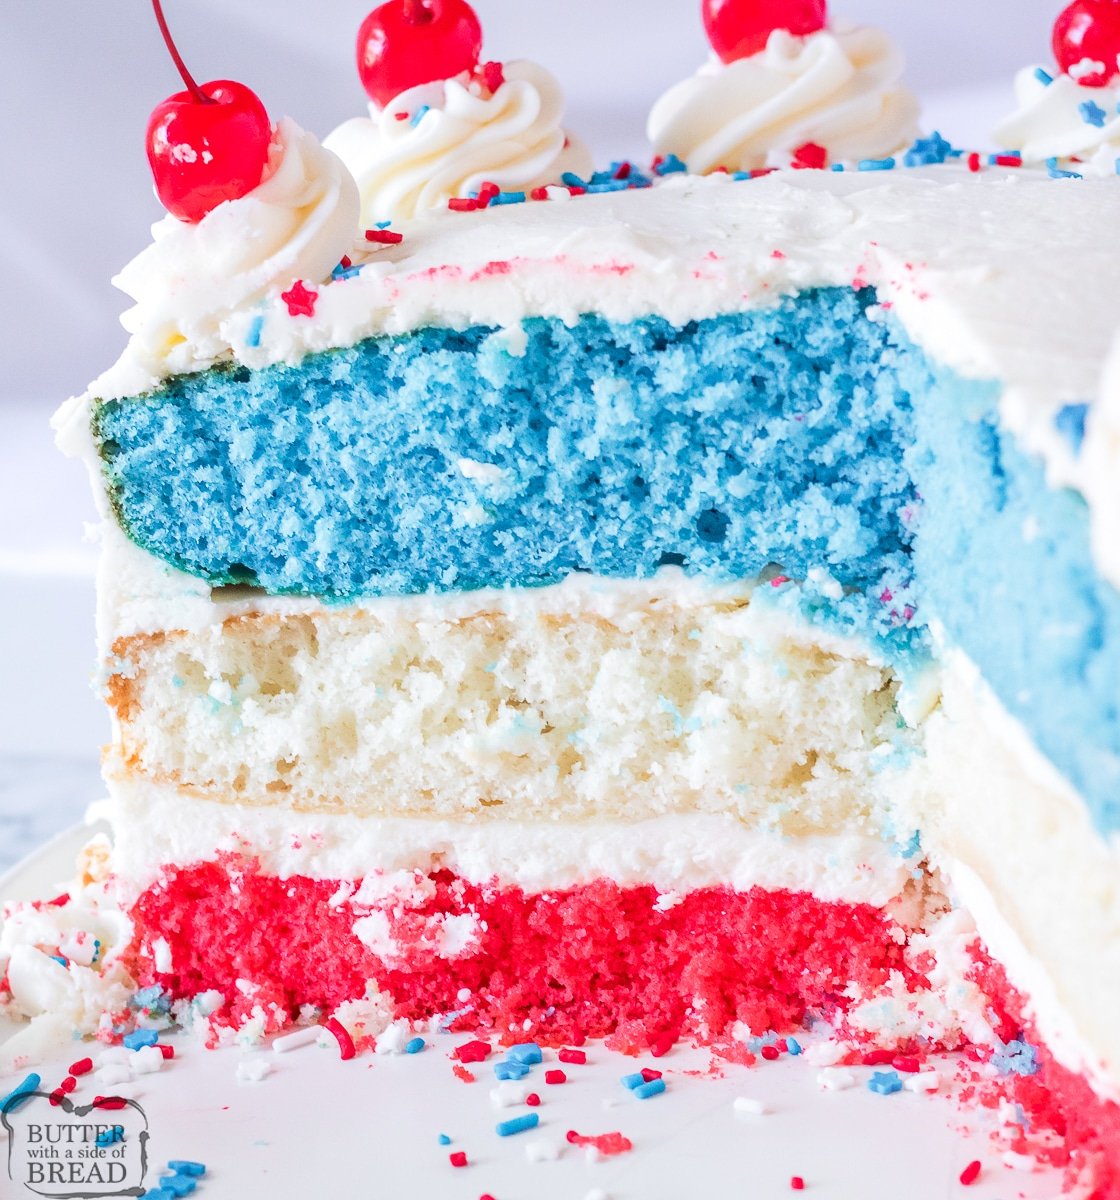 https://butterwithasideofbread.com/wp-content/uploads/2022/06/Red-White-and-Blue-Layer-Cake-20.jpg